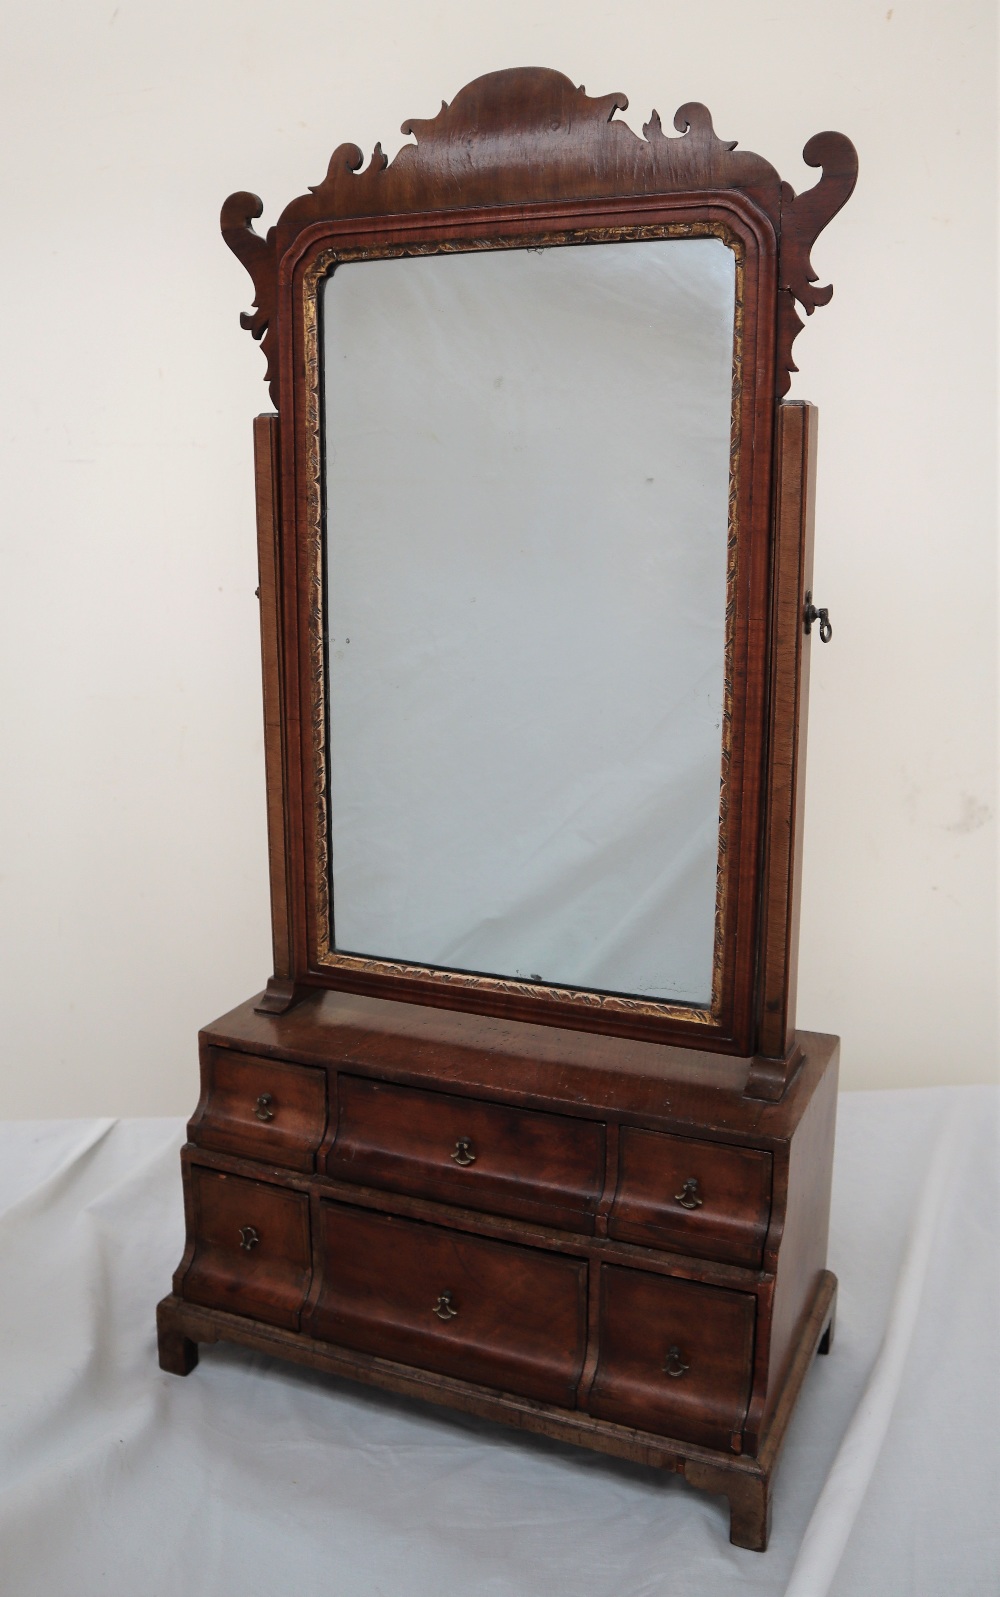 An 18th century walnut toilet mirror with a shield shaped plate and six drawers on bracket feet, - Image 3 of 4